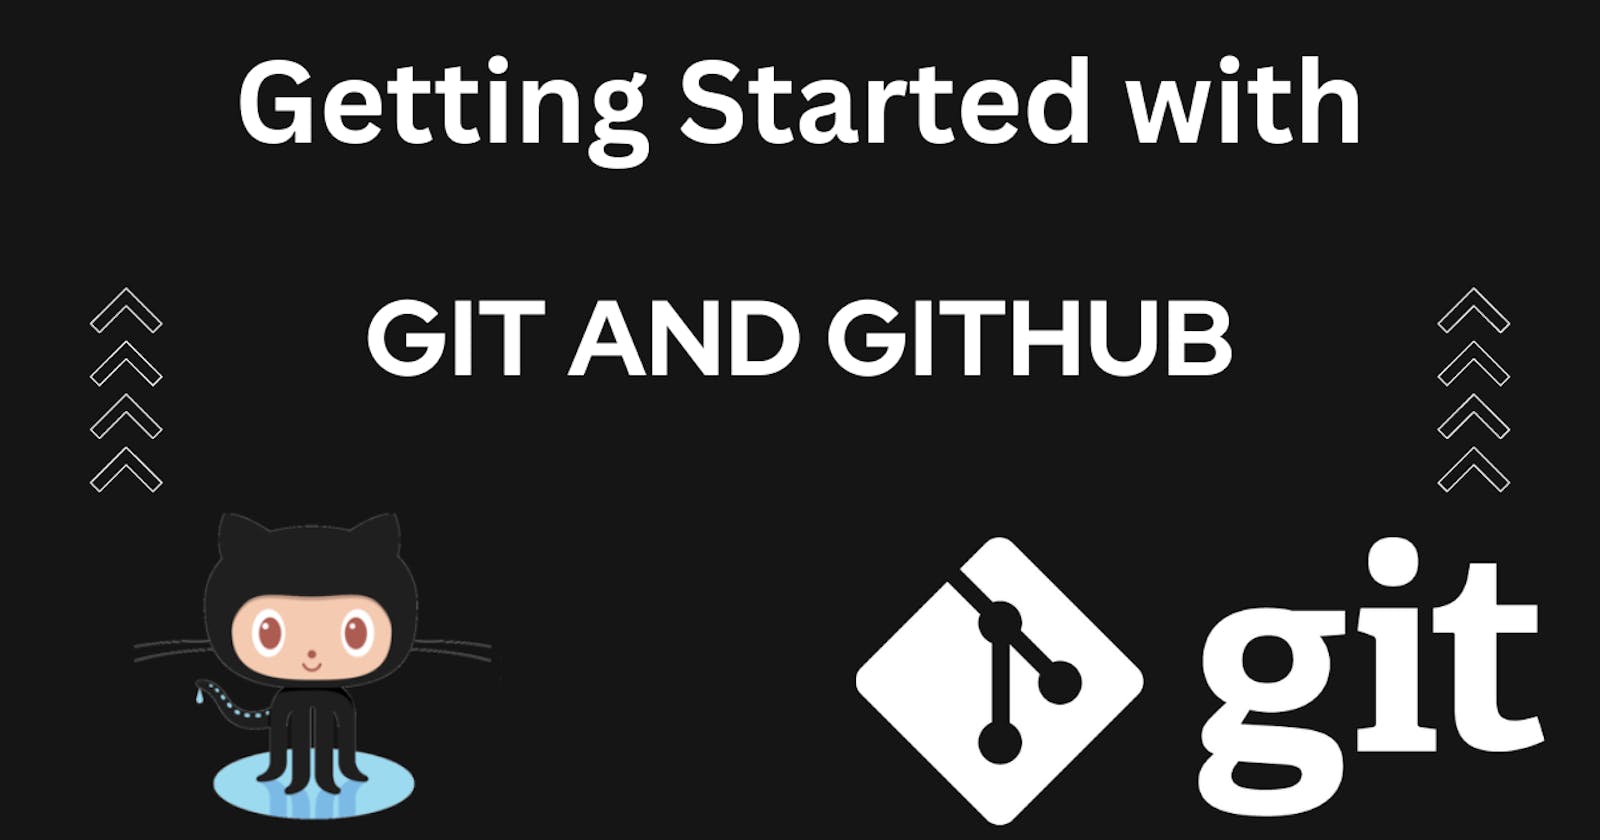 Getting Started with GIT and GITHUB